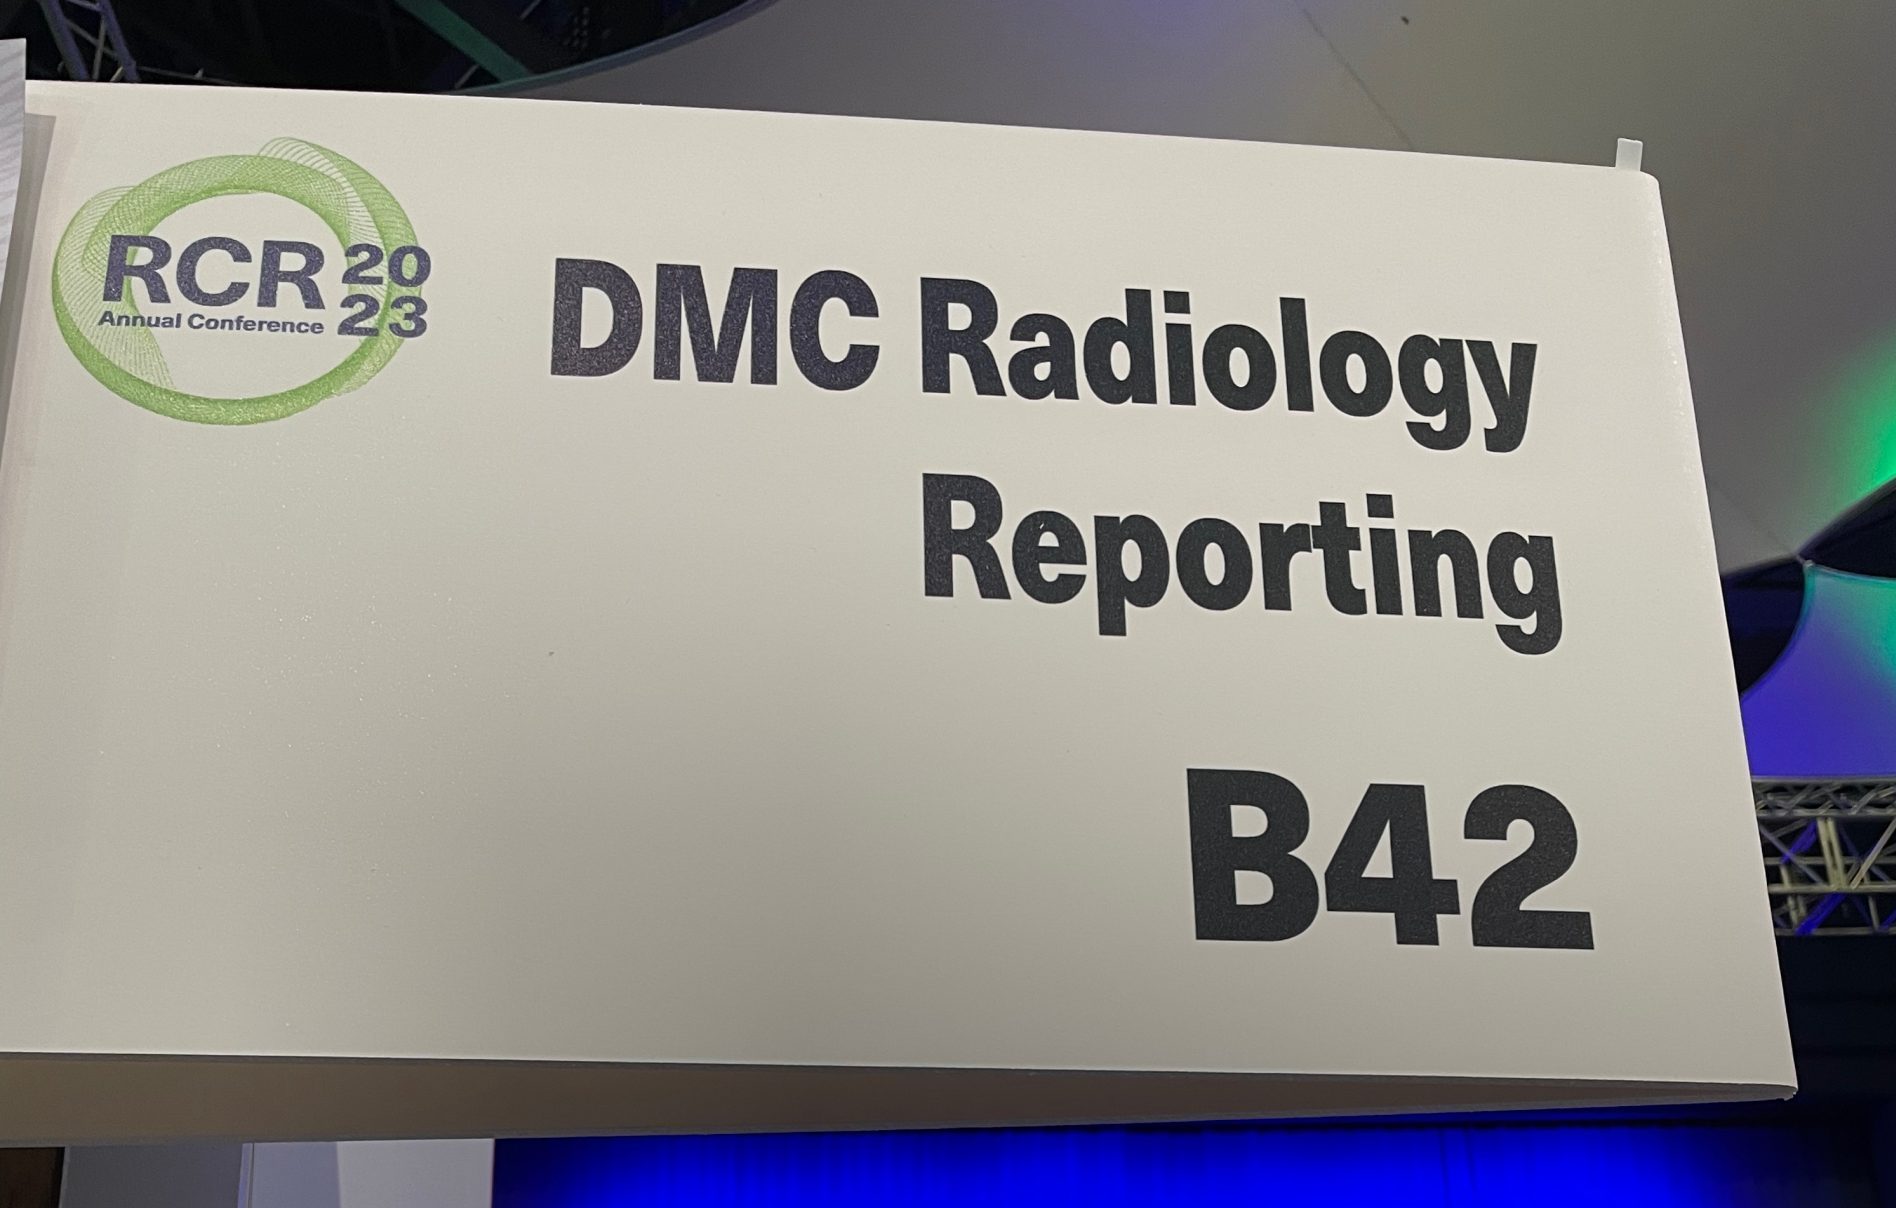 DMC Radiology Reporting were recent proud Gold Sponsors of the 2023 RCR Annual Conference. Our team met and engaged with many leading UK radiologists, and had the unique opportunity to hear numerous insightful lectures over the 2-day congress. Over 12th-13th October, the ICC Birmingham played host to over 500 delegates attending in-person, with another 500 joining virtually.